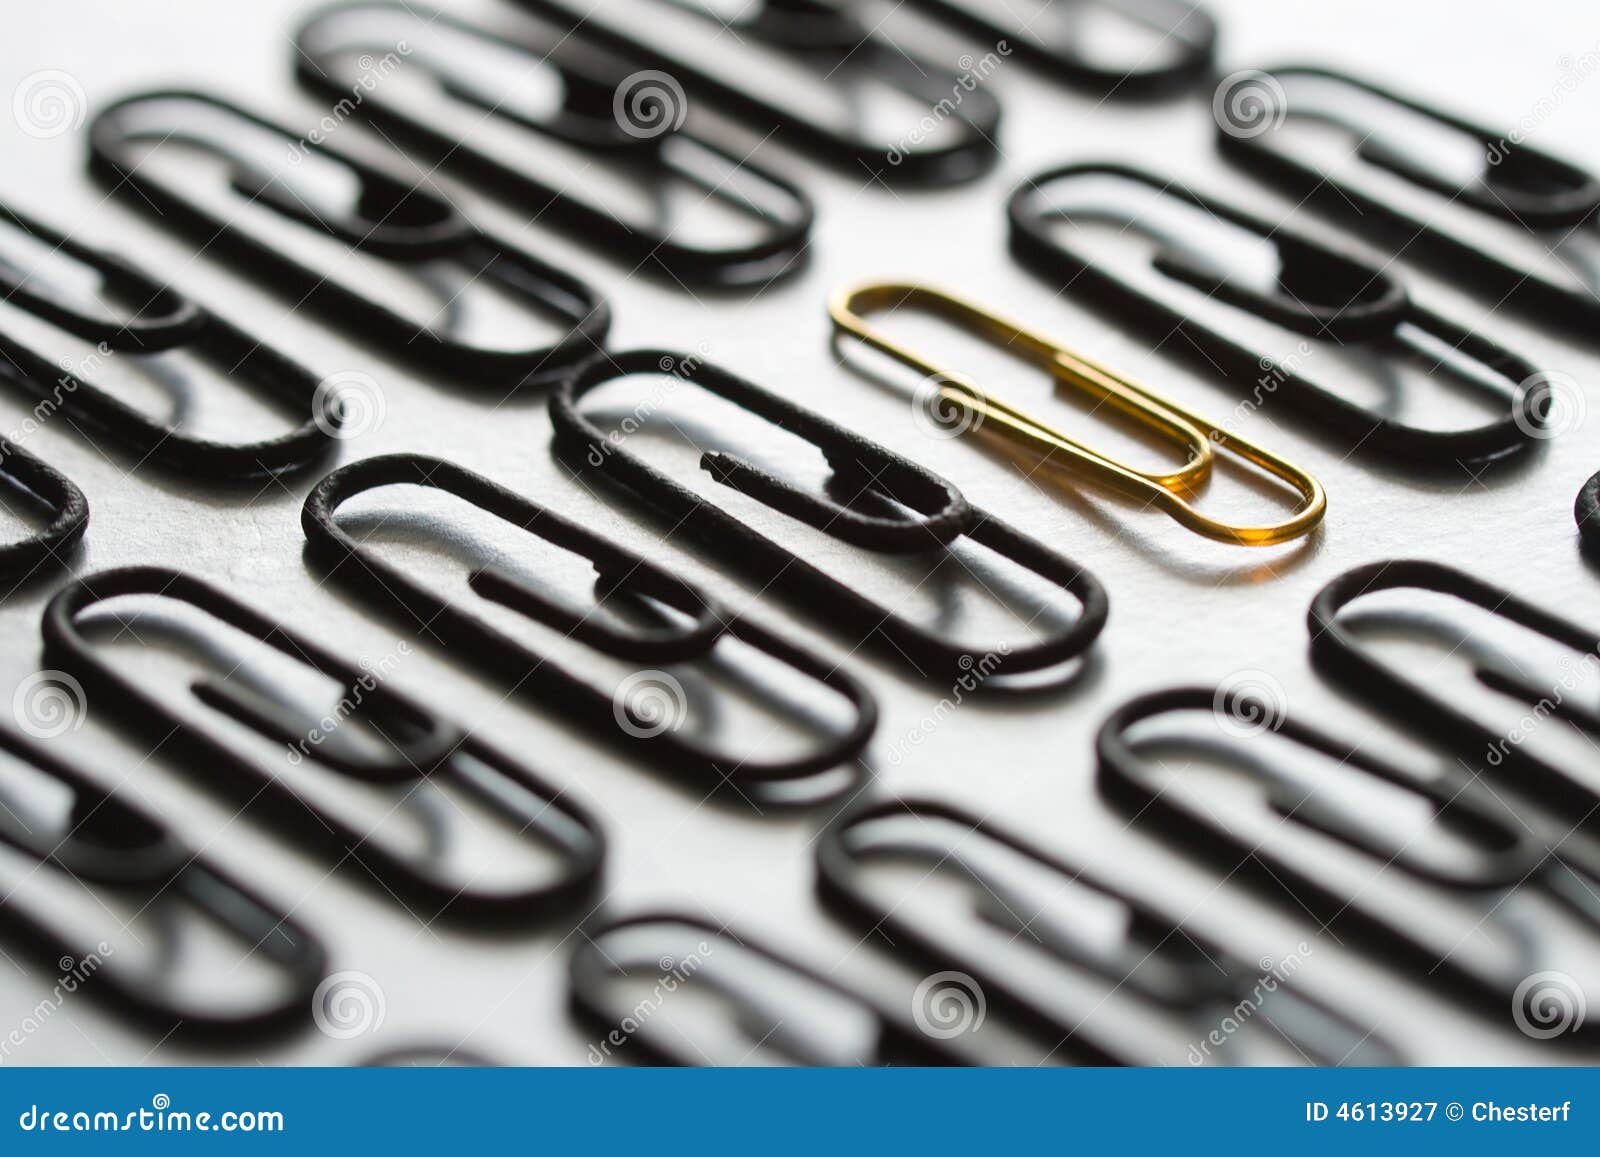 rows paper office clips